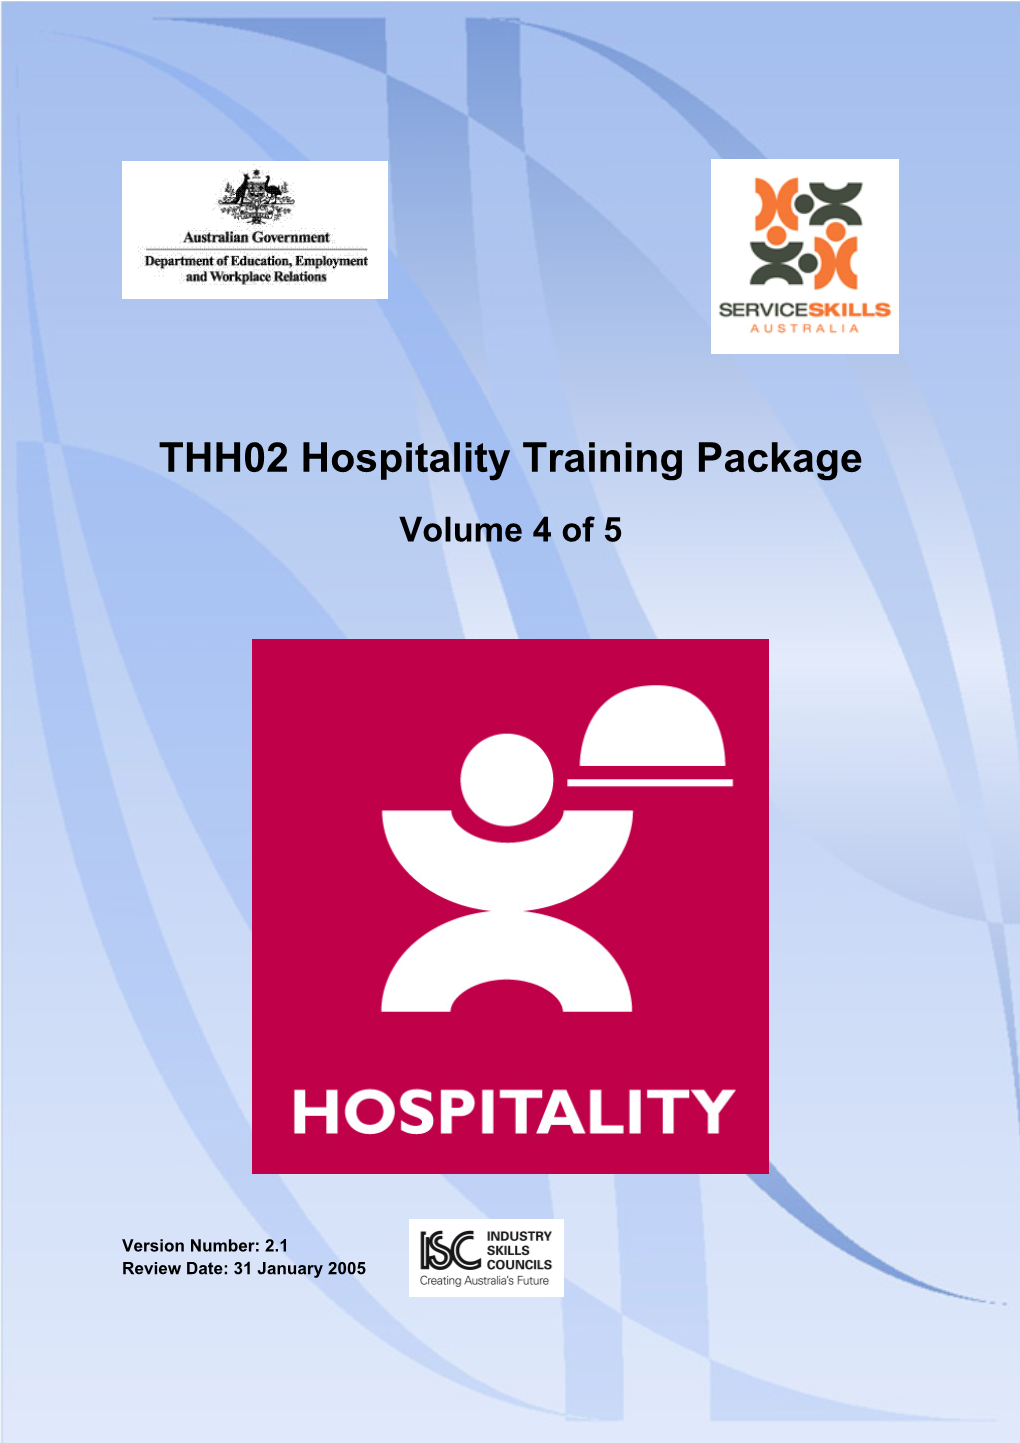 THH02 Hospitality Training Package Volume 4 of 5